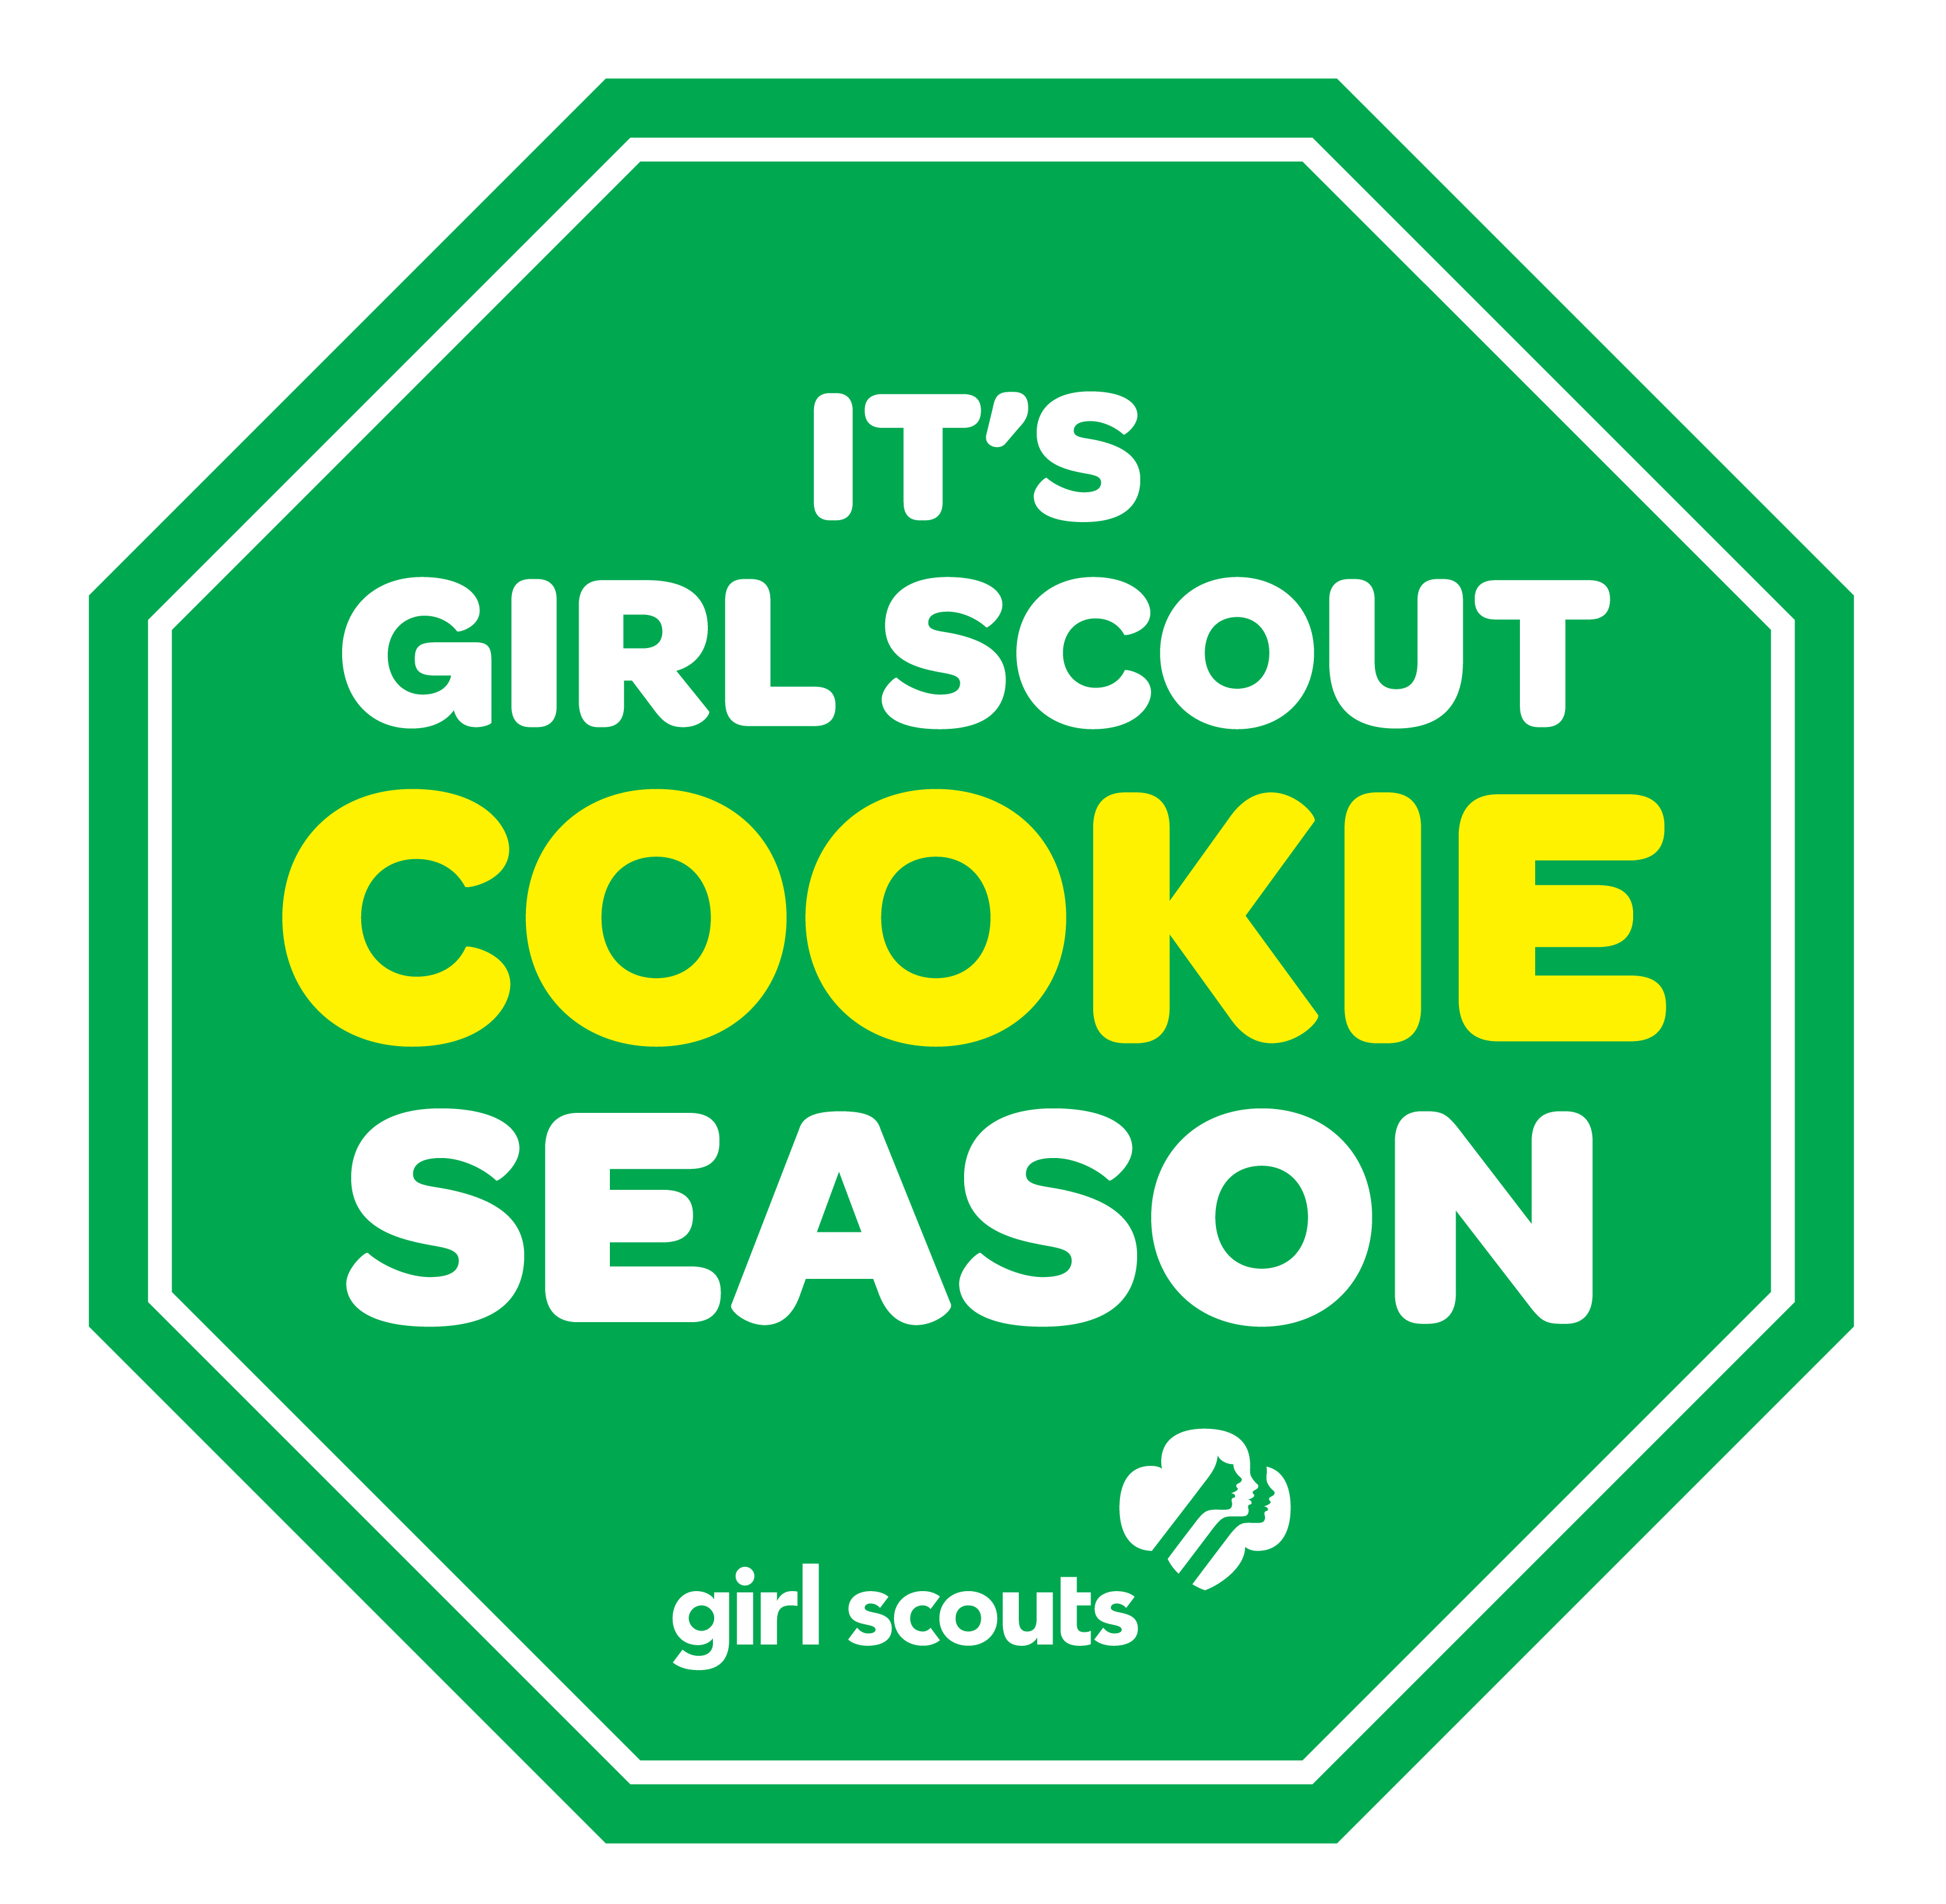 girl scout cookies clipart - photo #6